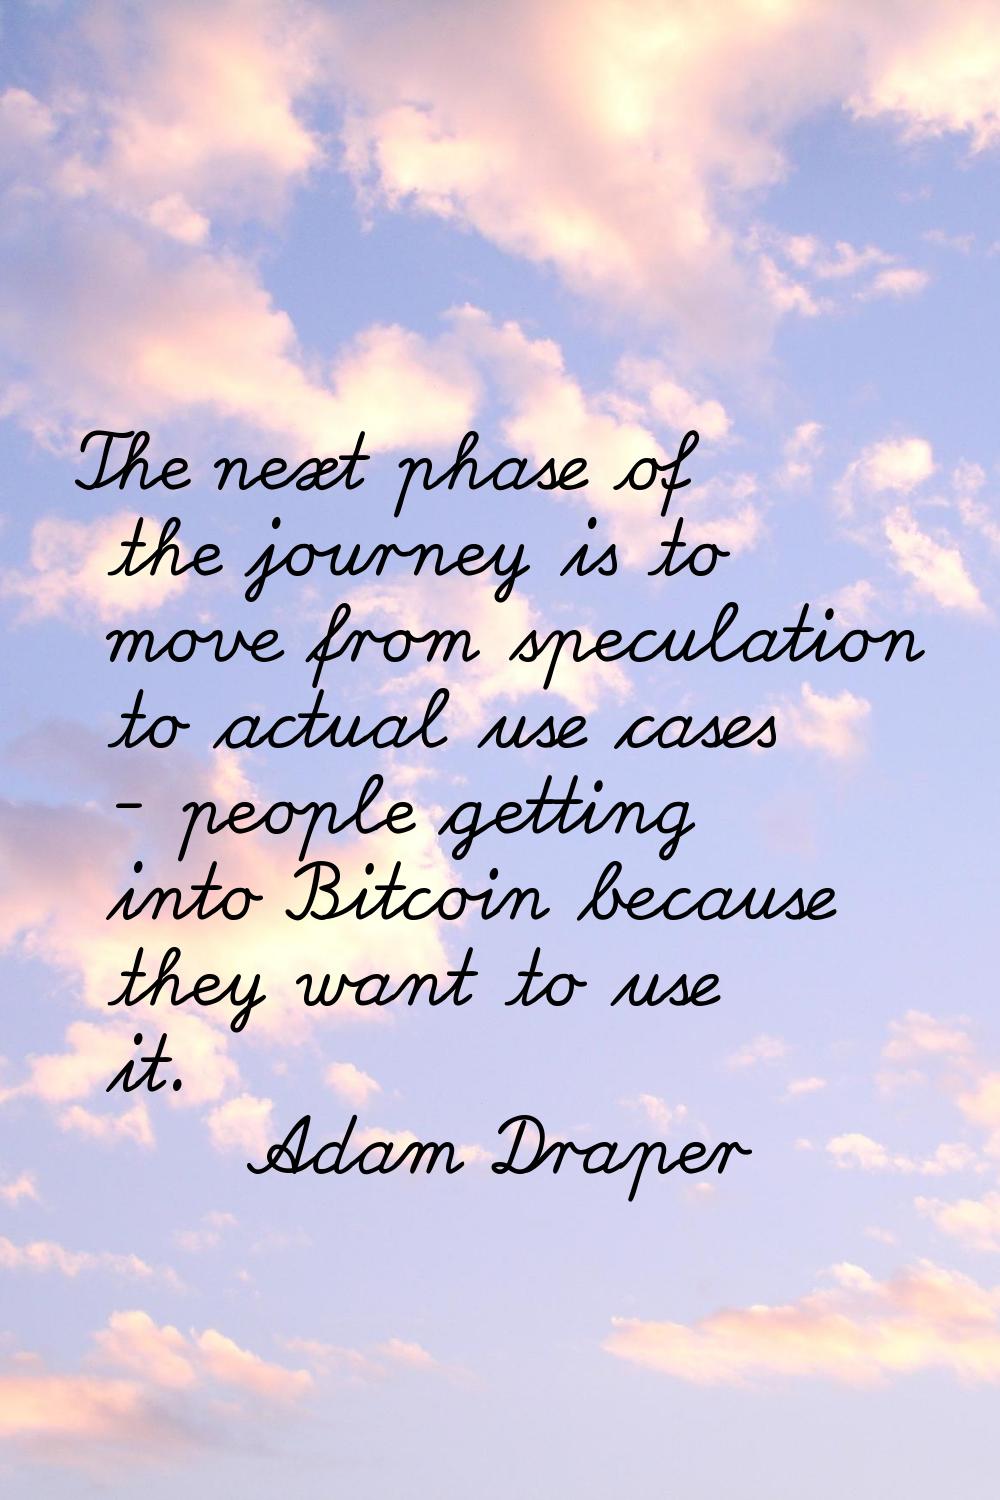 The next phase of the journey is to move from speculation to actual use cases - people getting into